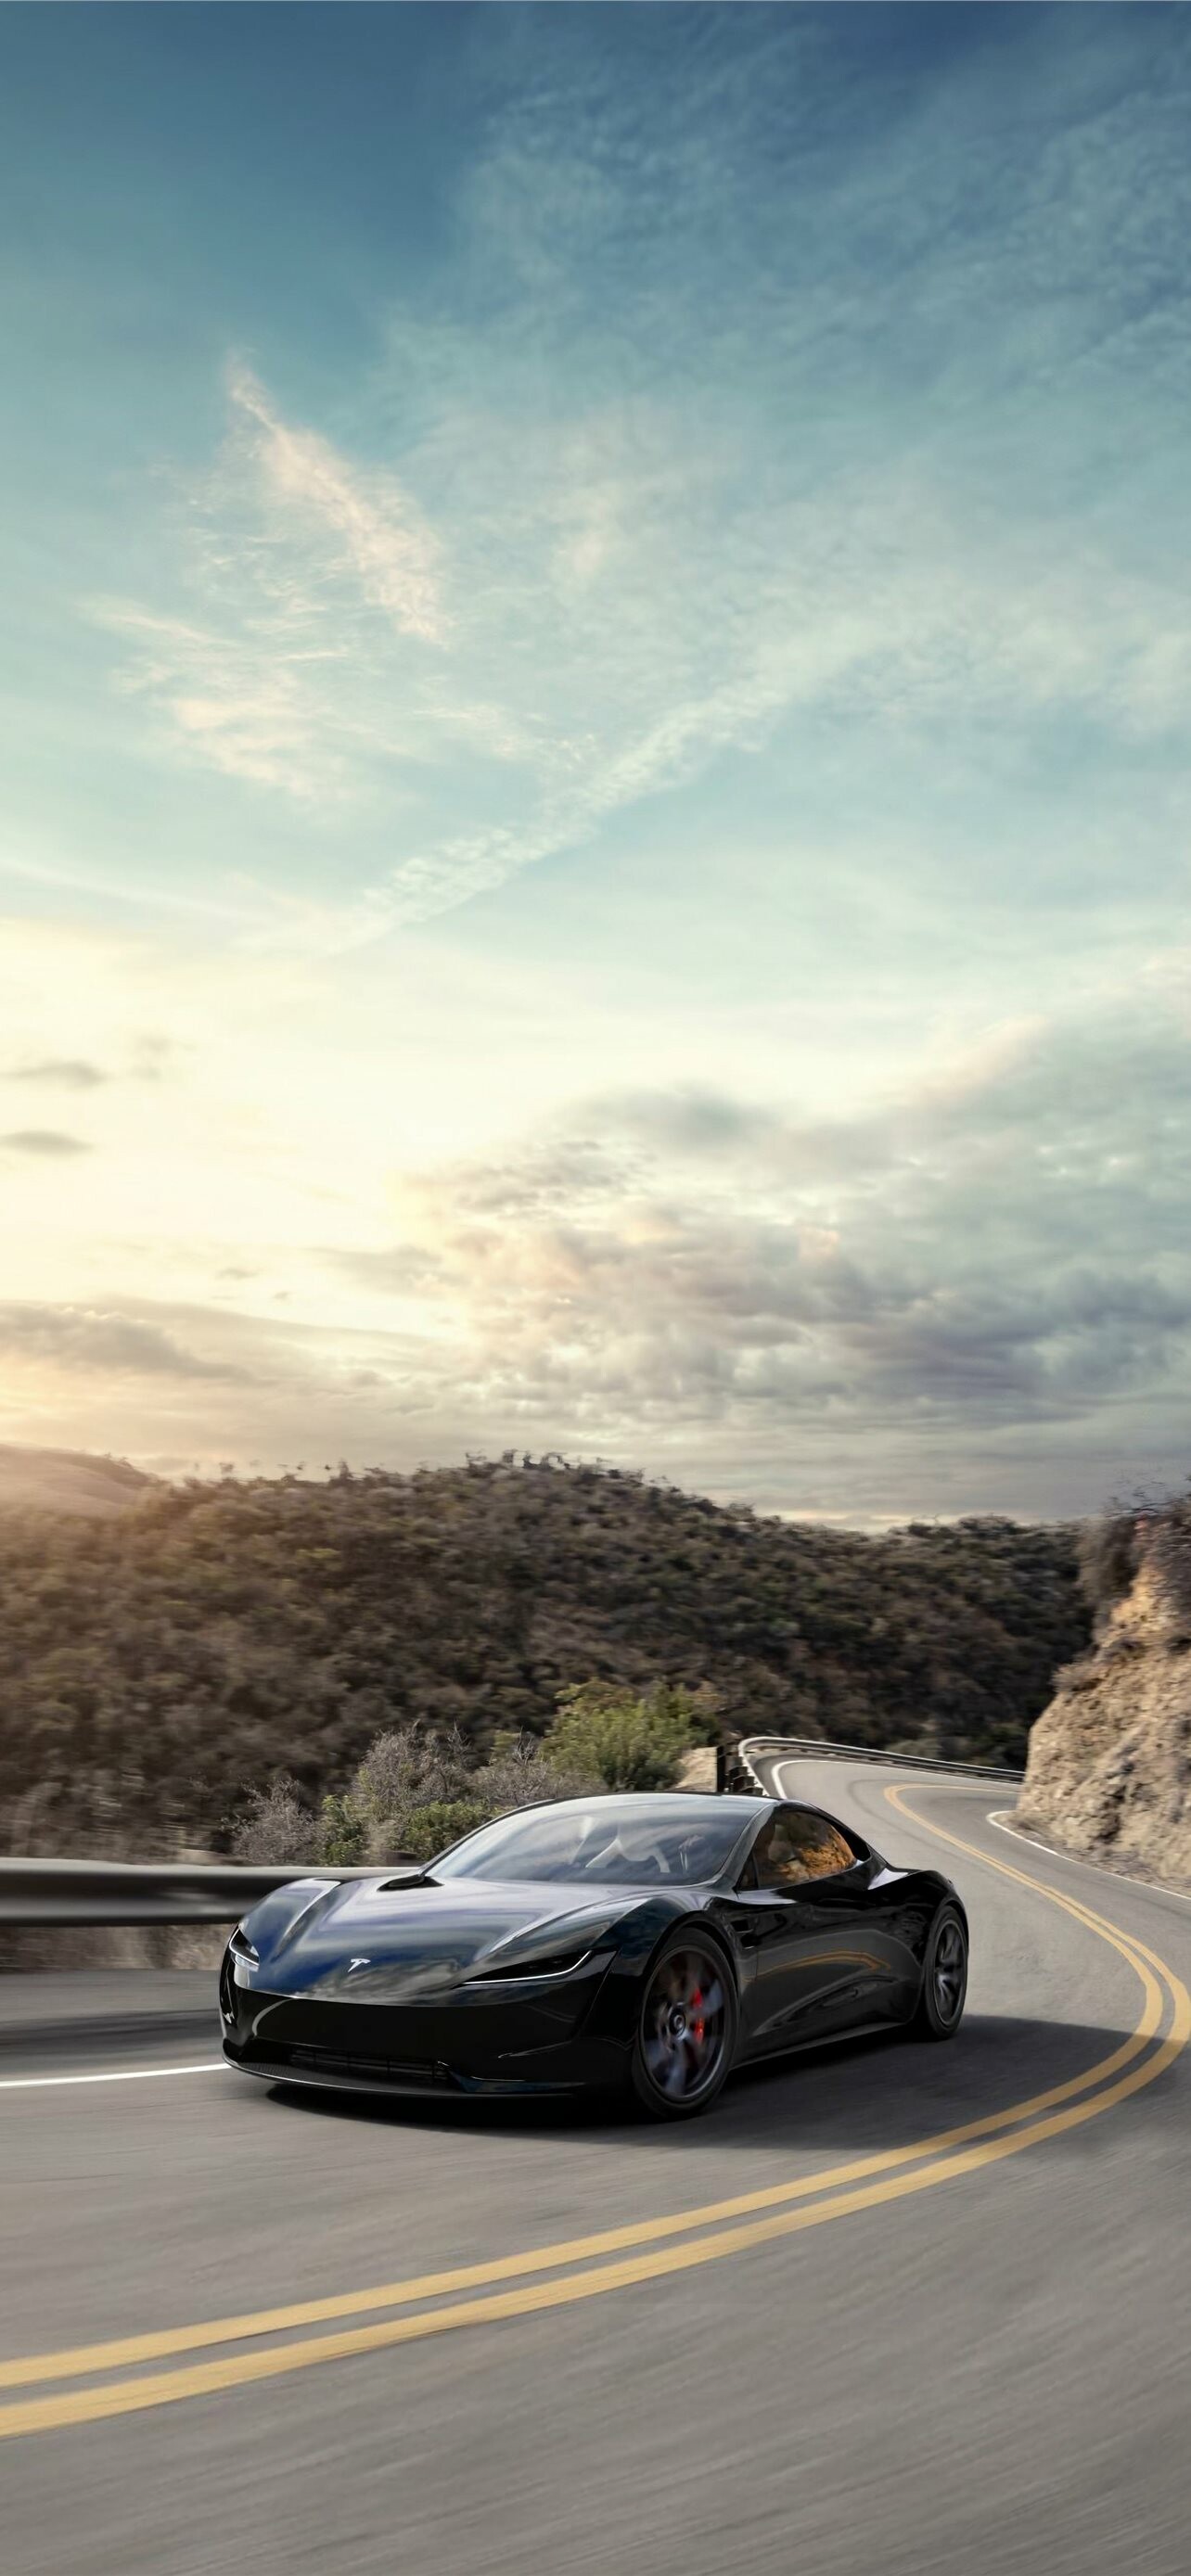 Tesla Model S: An American electric-car company, Network of superchargers for fast charging. 1290x2780 HD Wallpaper.